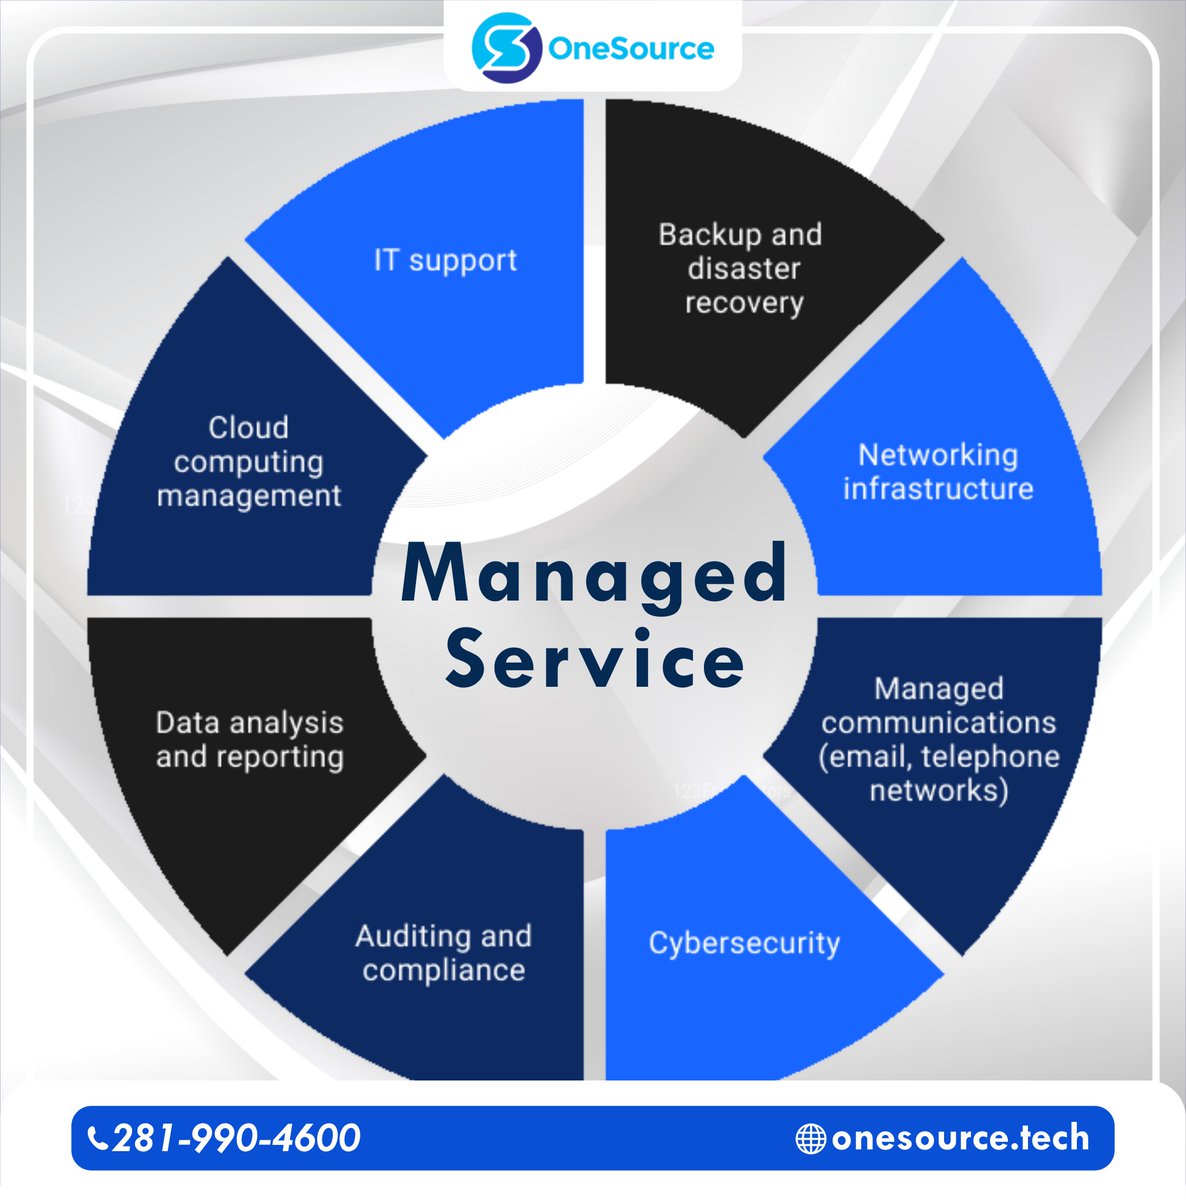 Are you looking for computer support or IT outsourcing services in Houston, TX? Then you've come to the right place because OneSource is the best provider of customized IT services and solutions for small and medium businesses.
#ITSupportlife #ITSupportteam #cloudcomputing